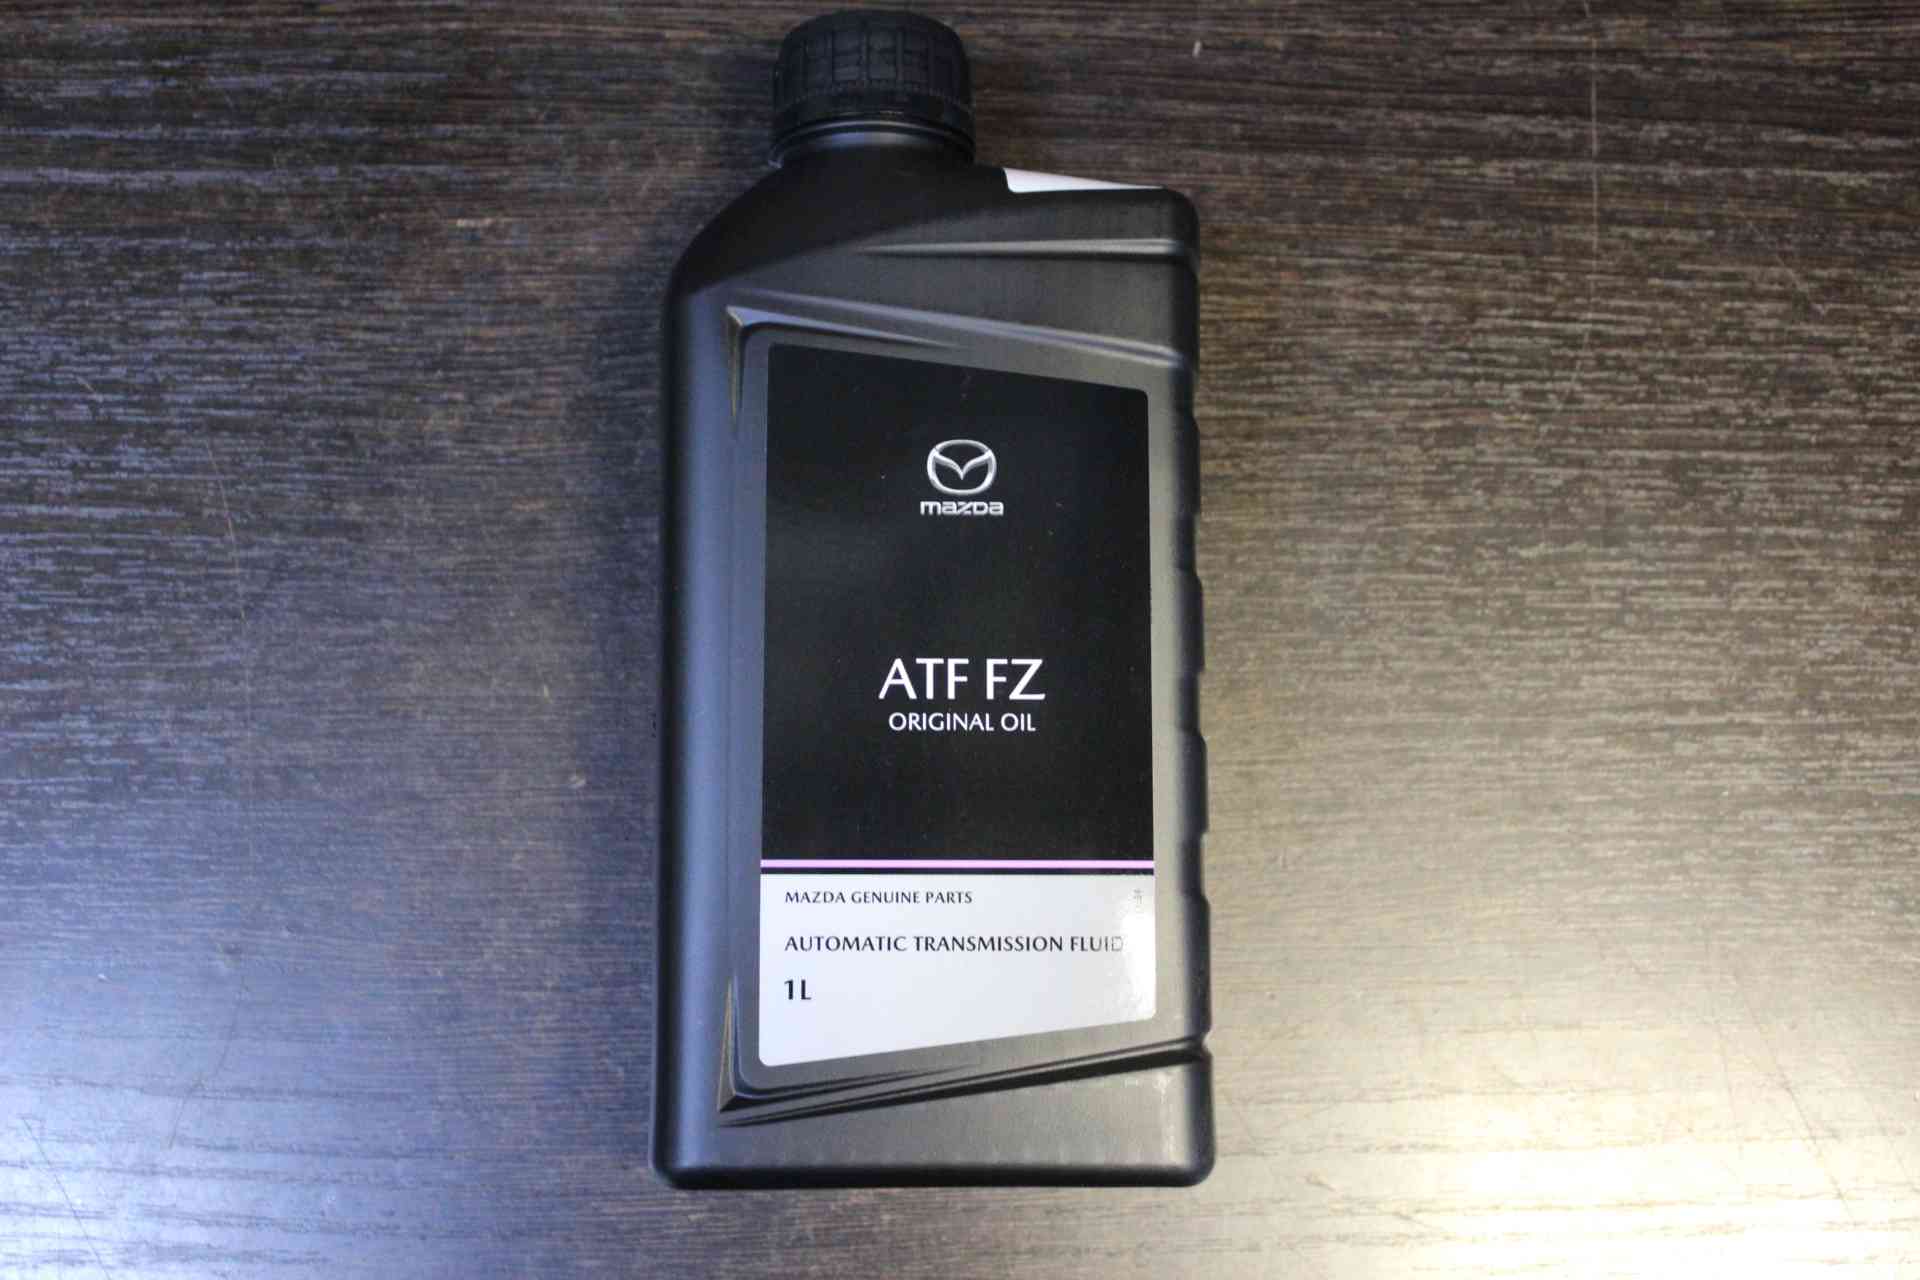 Mazda ATF FZ. Масло Мазда АТФ FZ. Масло Mazda ATF FZ. Mazda ATF FZ цвет. Масло atf 5